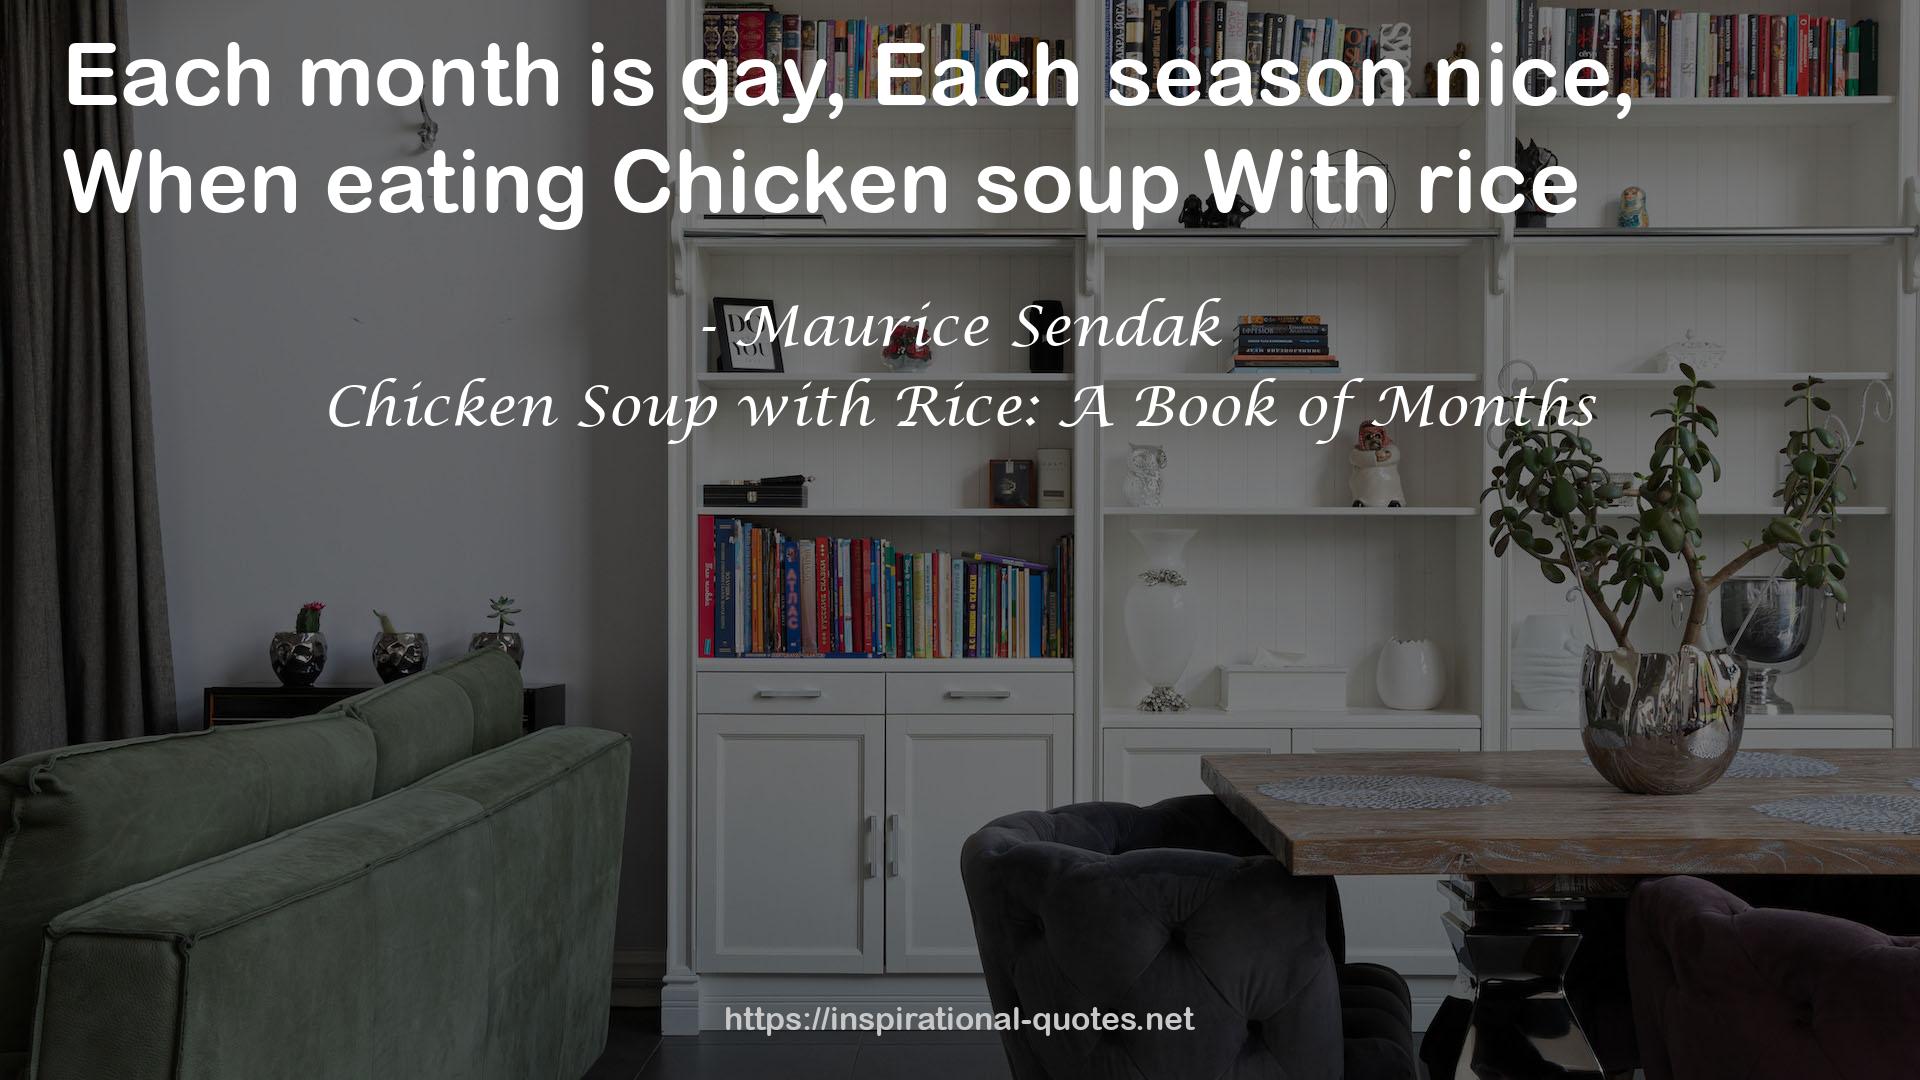 Chicken Soup with Rice: A Book of Months QUOTES